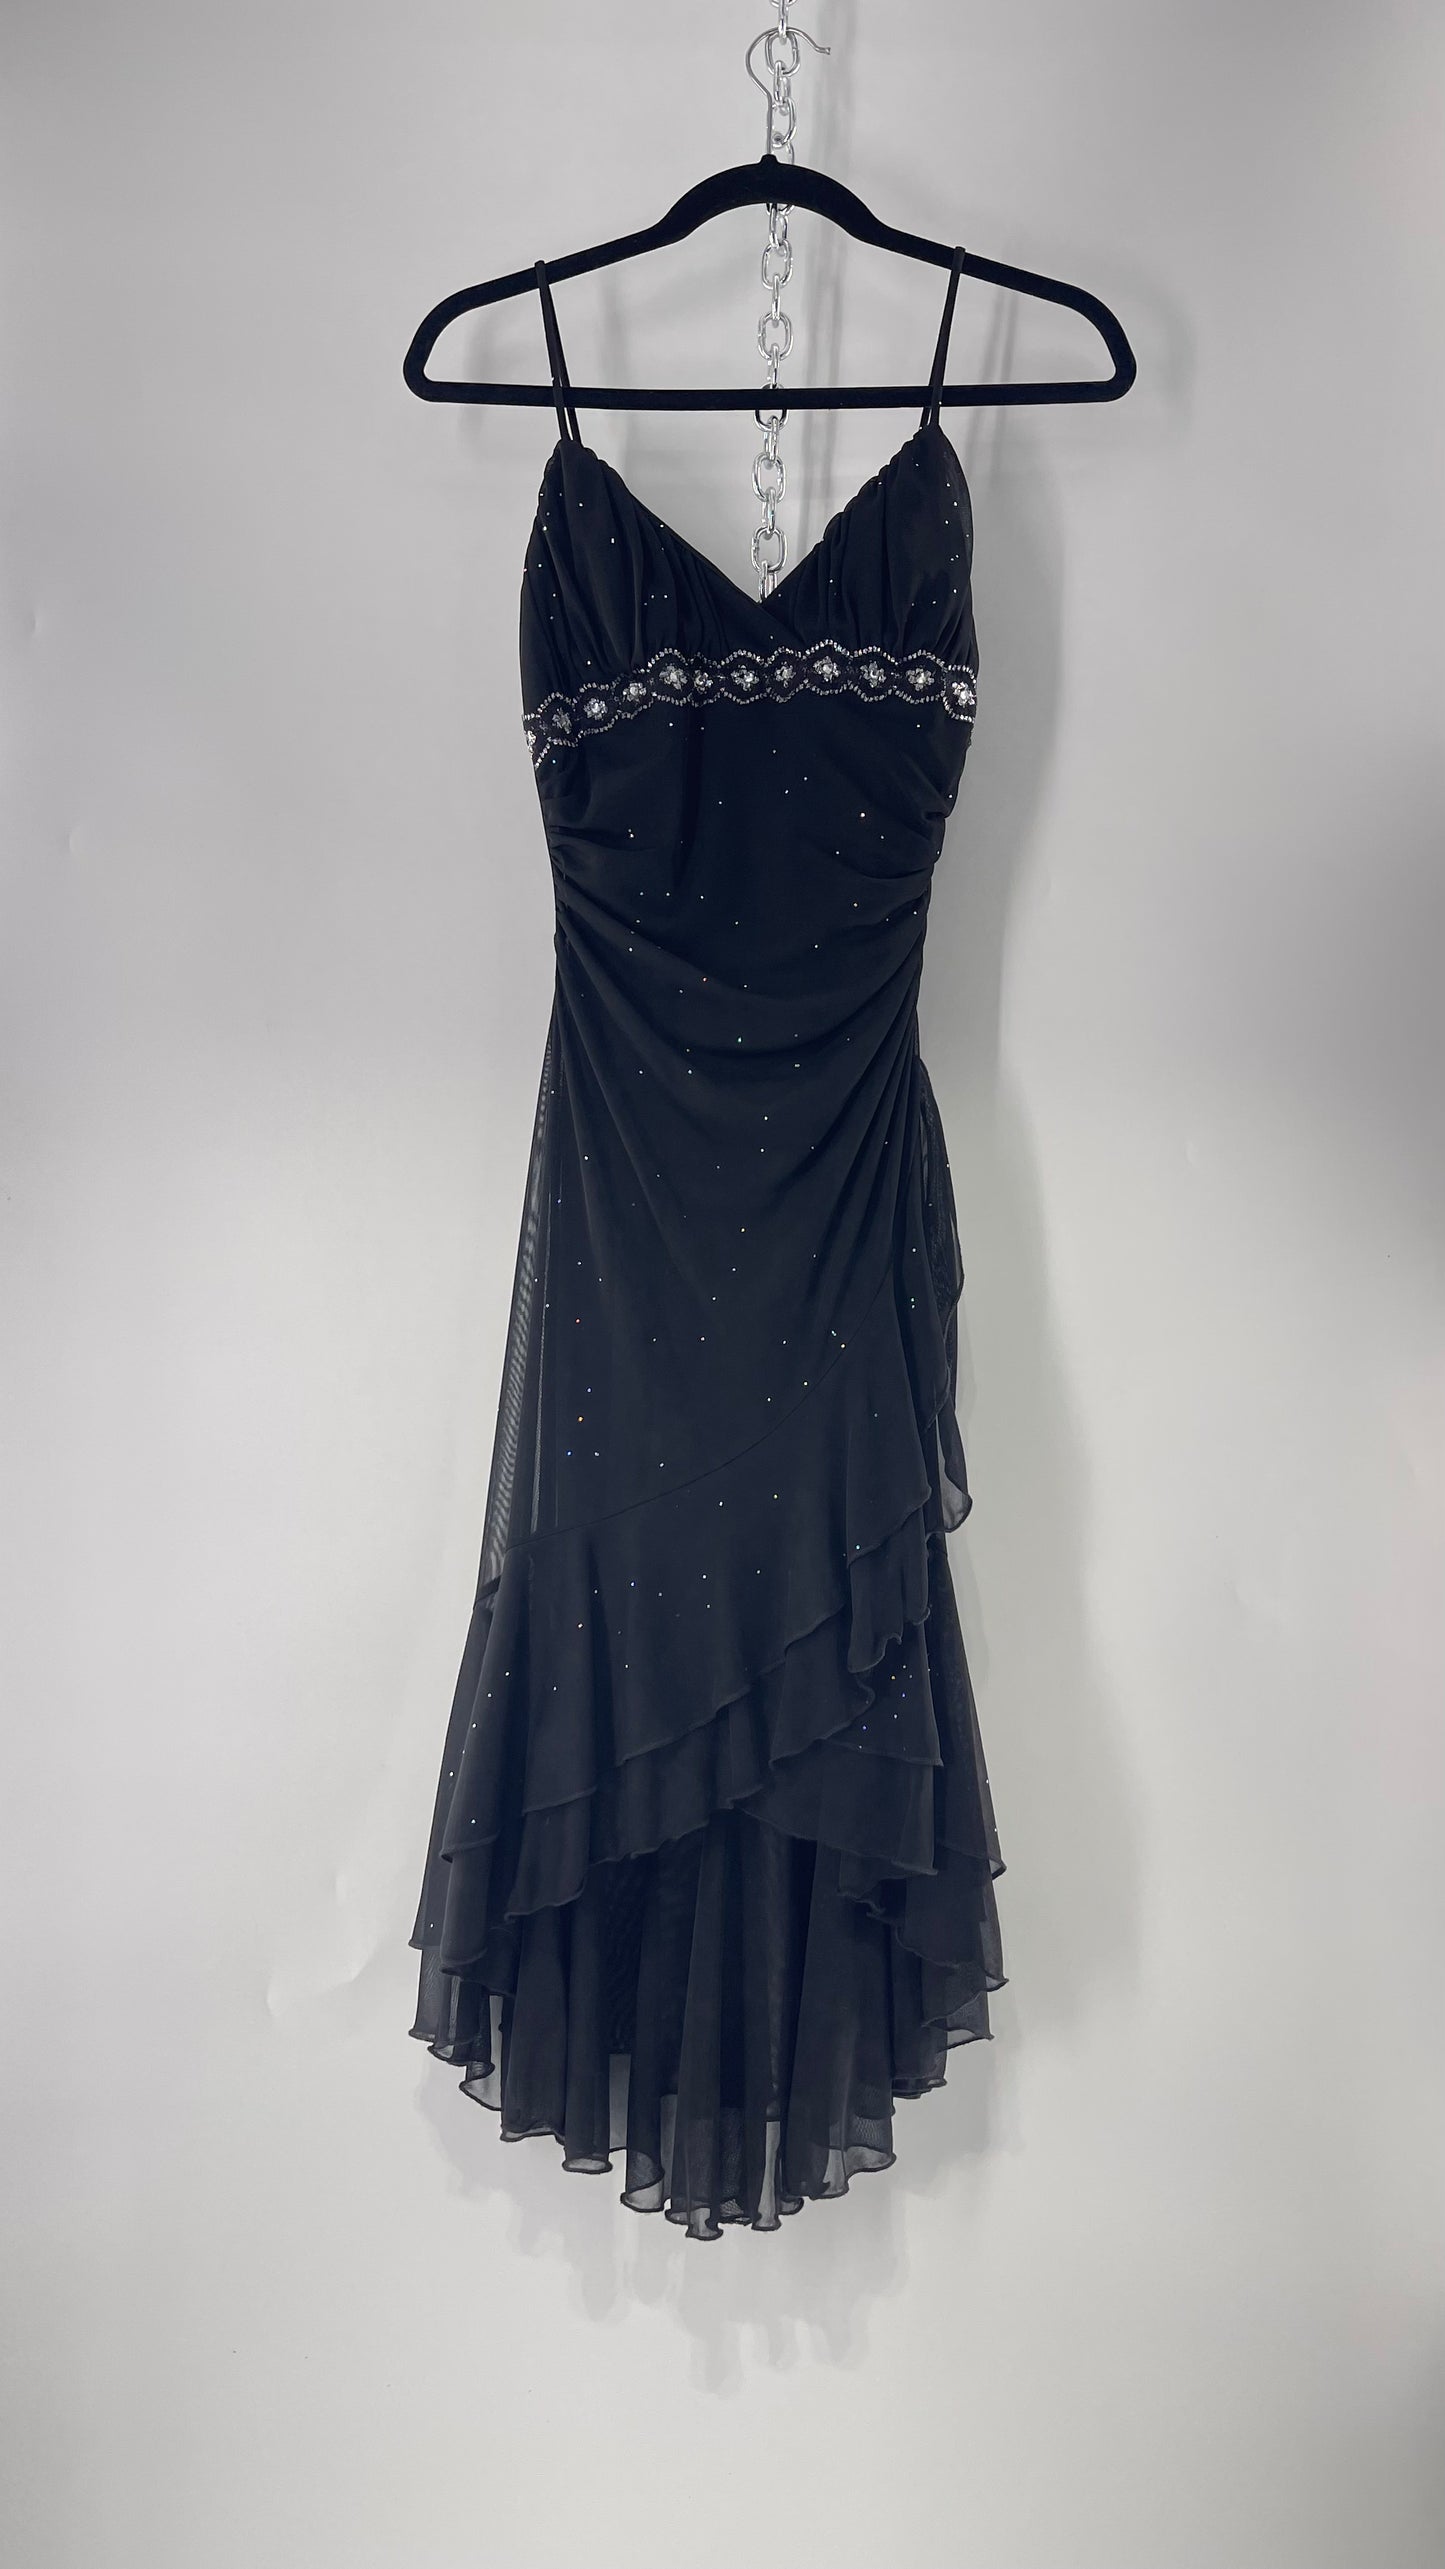 Vintage Taboo Midi Dress with Iridescent Sequins with Lace Underbust Detail, High Low Silhouette and Frills (Medium)